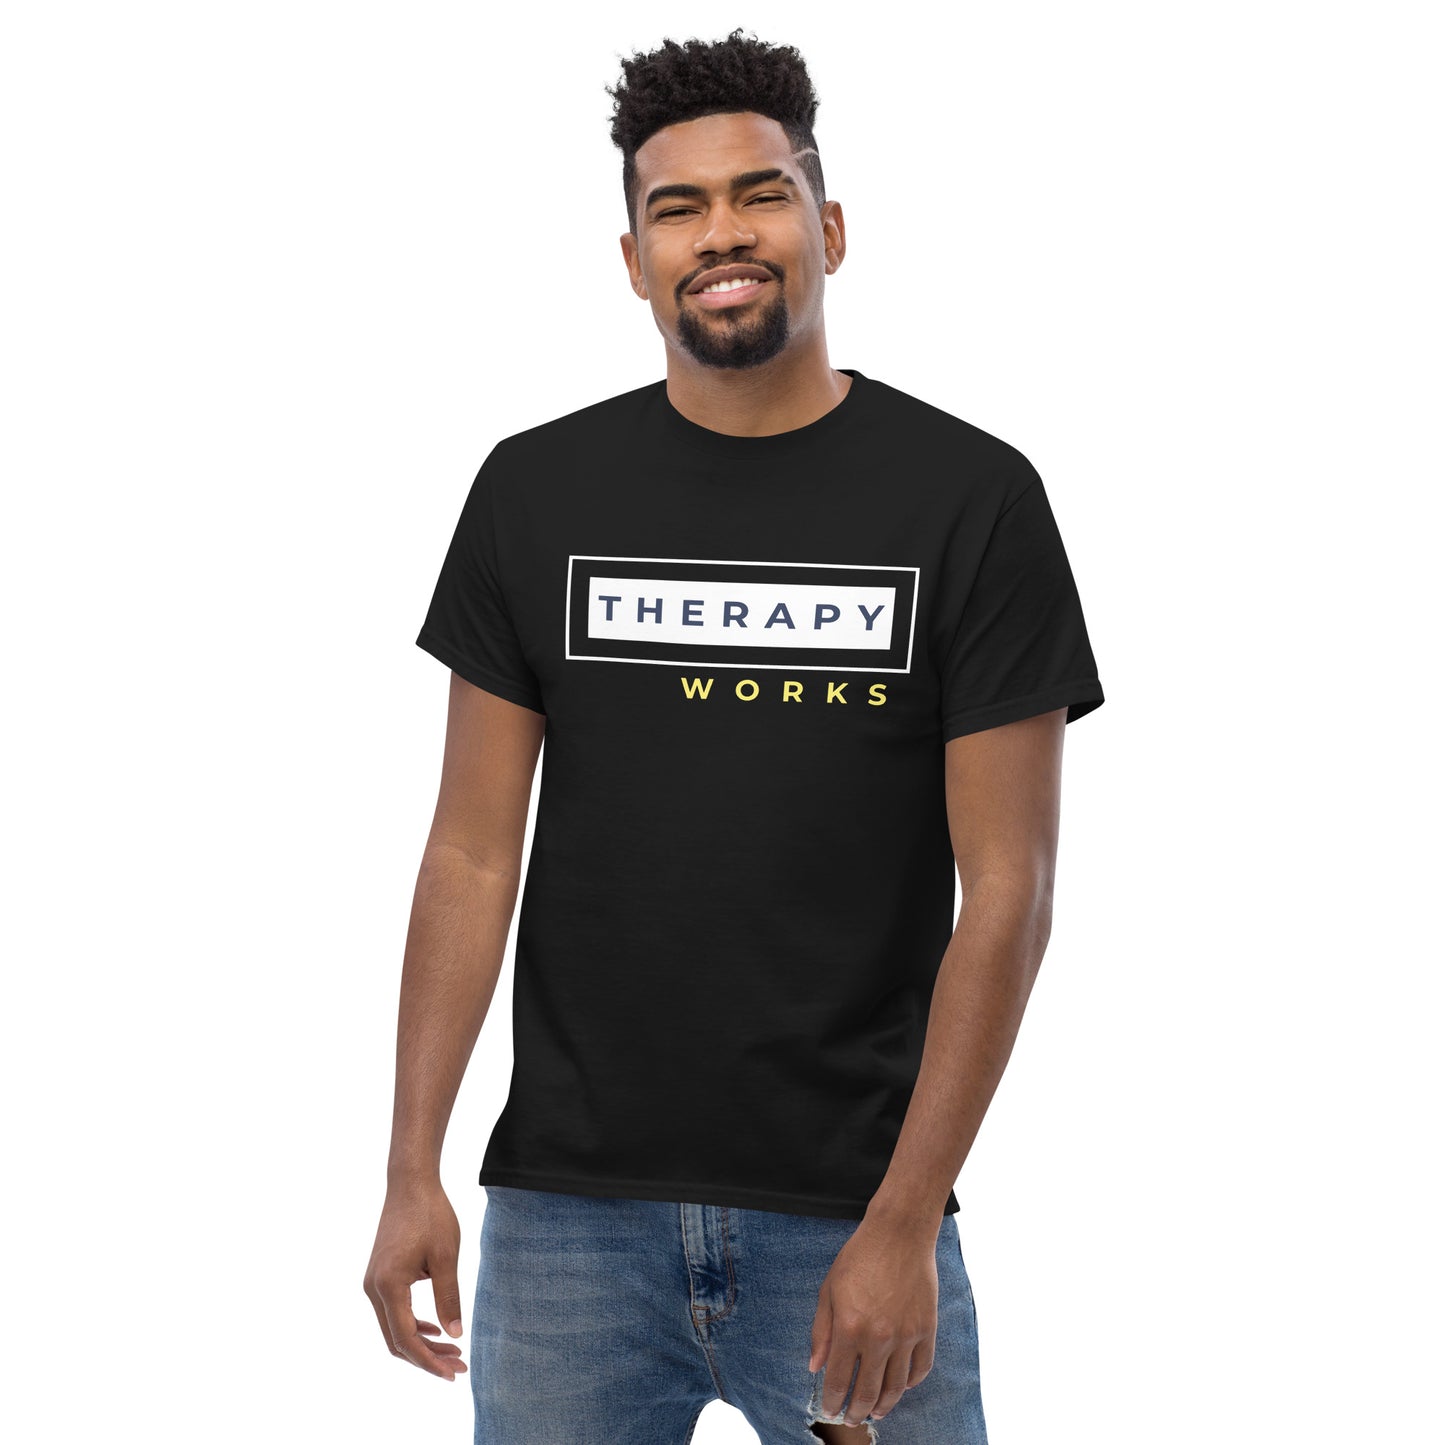 Therapy Works Tee